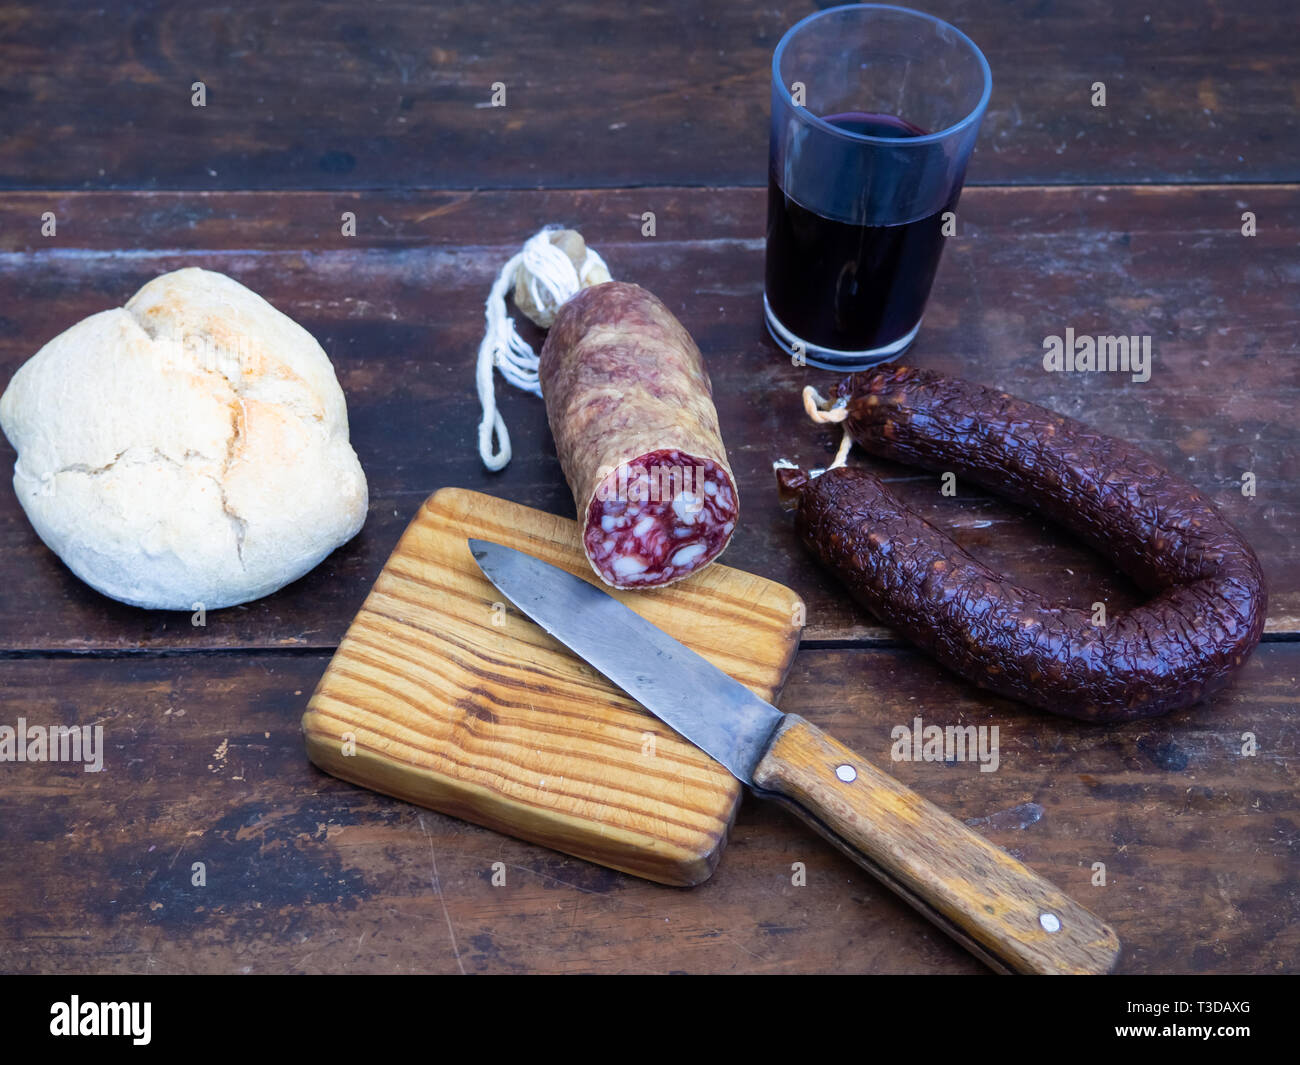 Iberian pork sausages on an old wooden board with a wedge of sheep cheese, an antique knife and a glass of red spanish wine Stock Photo